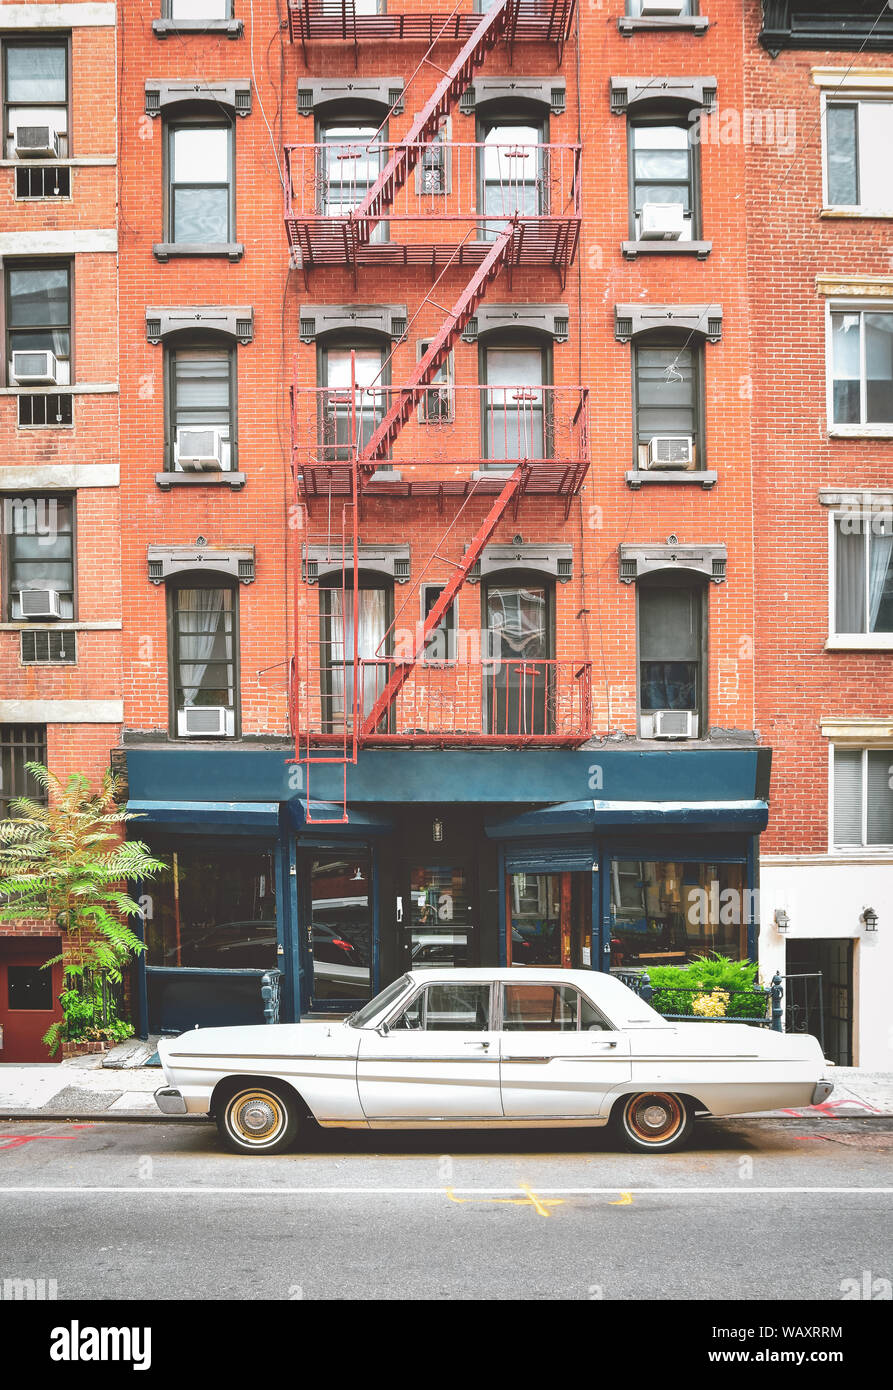 Typical red brick buildings with fire stairs in NYC. Classic car in the foreground and vintage photo effect. Stock Photo